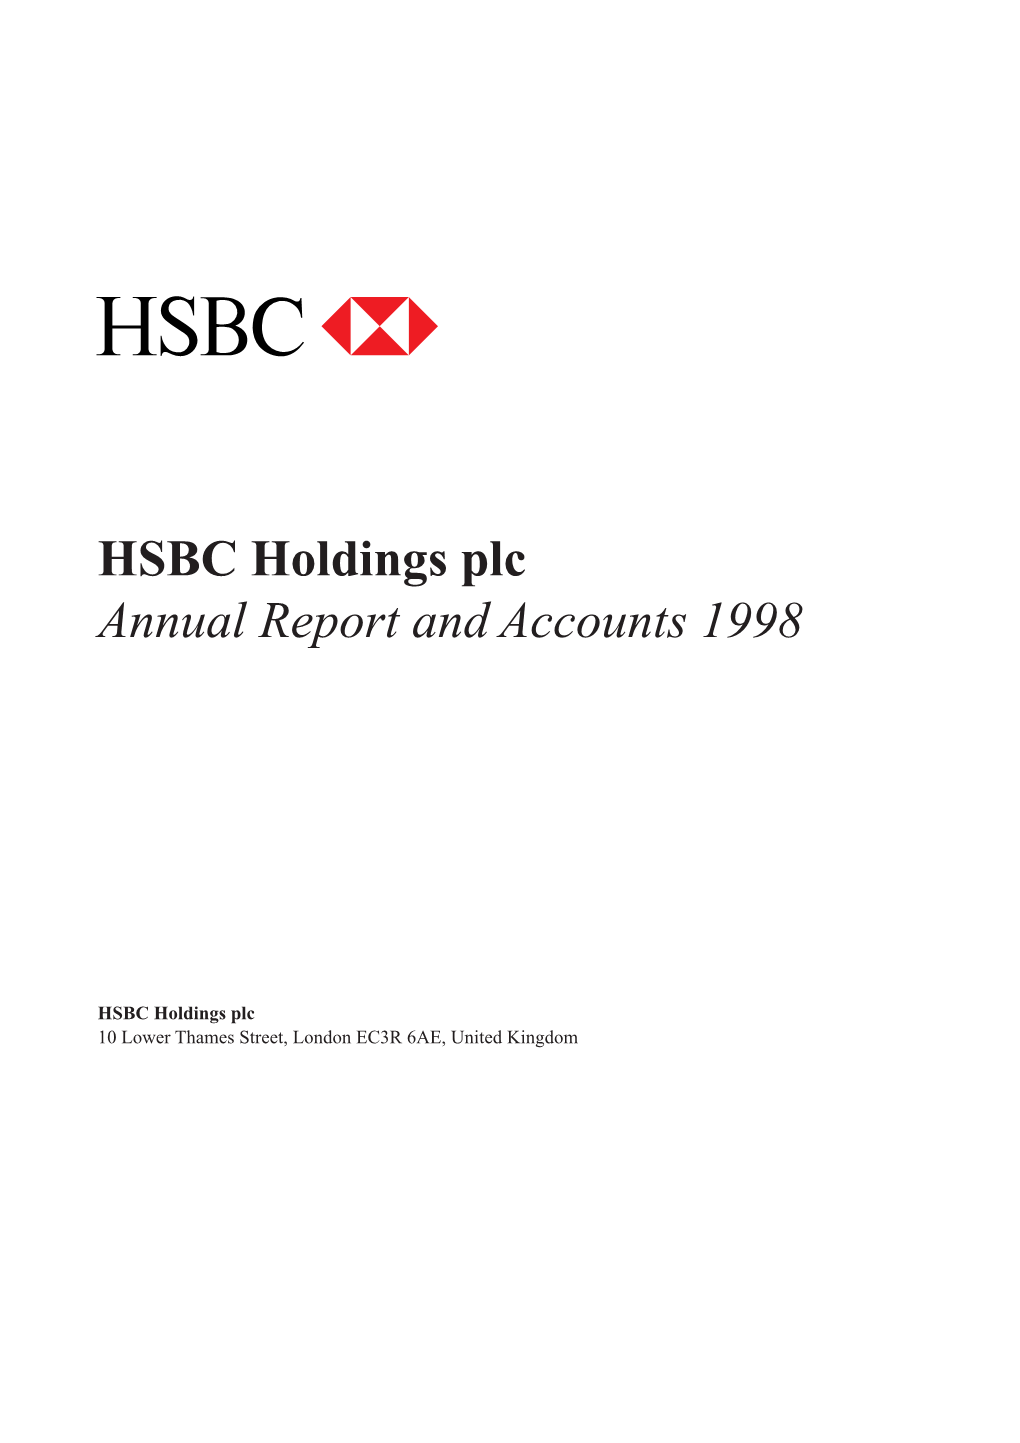 HSBC Holdings Plc Annual Report and Accounts 1998